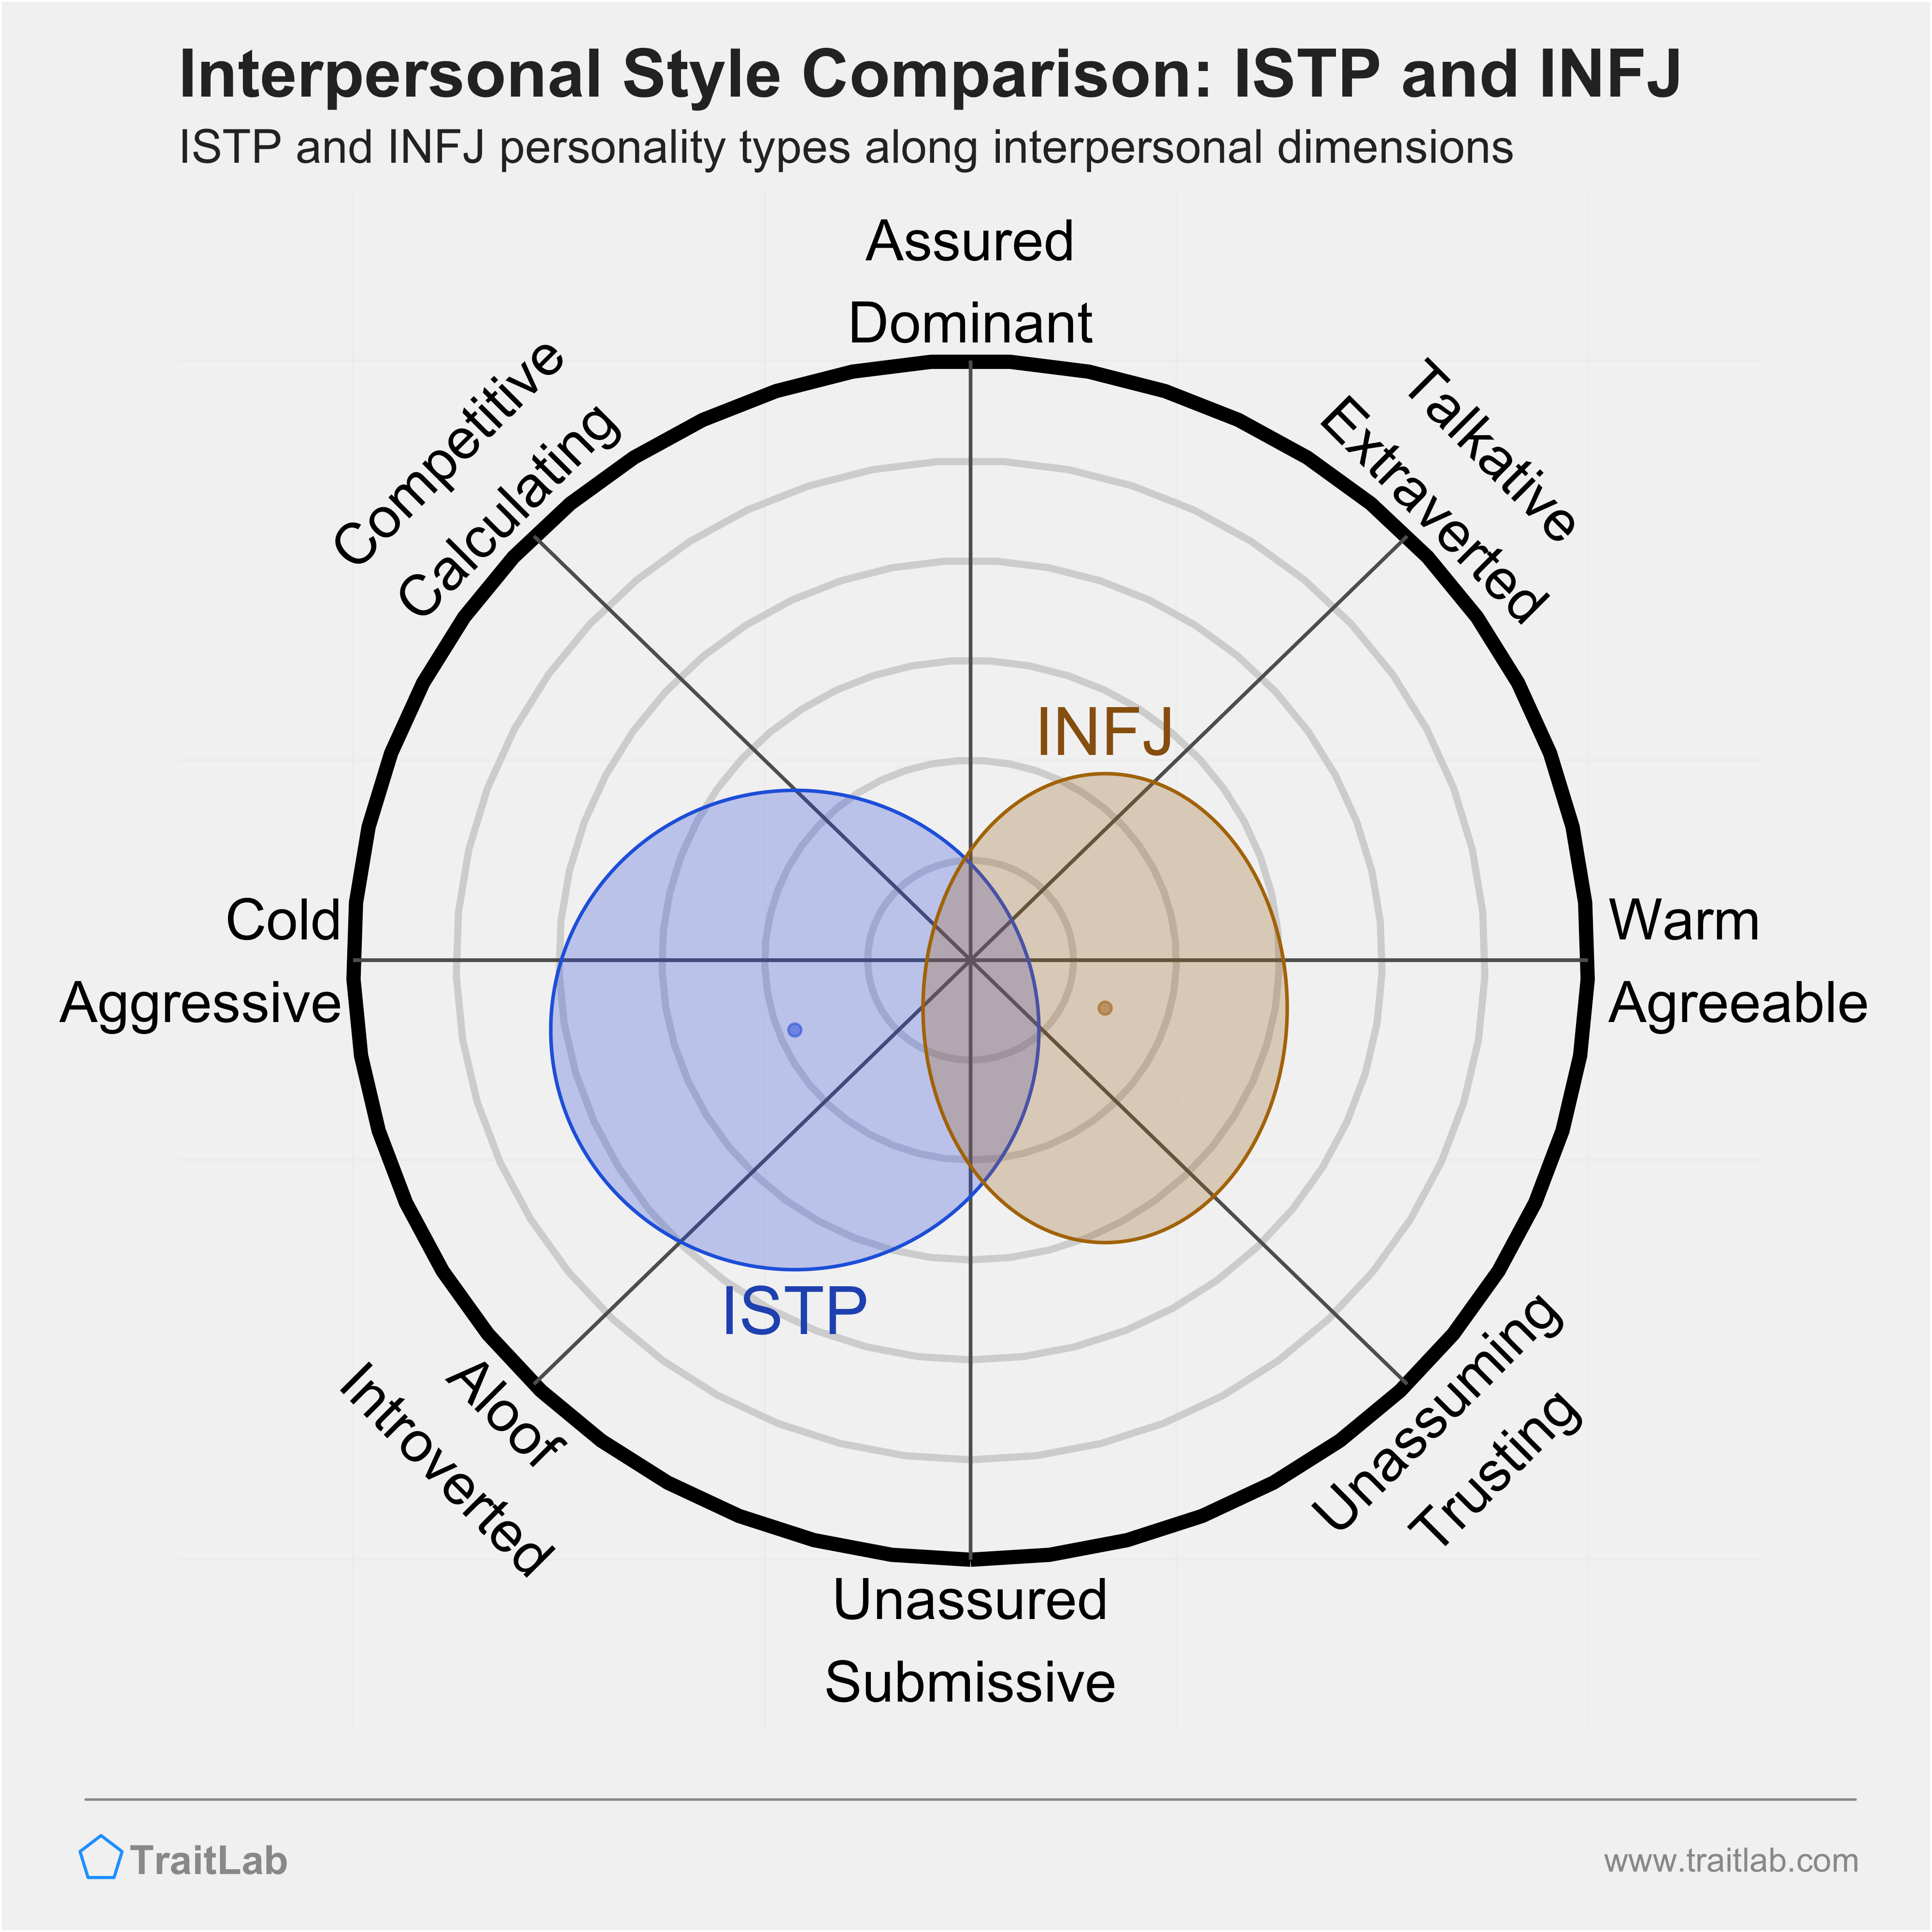 ISTP and INFJ comparison across interpersonal dimensions